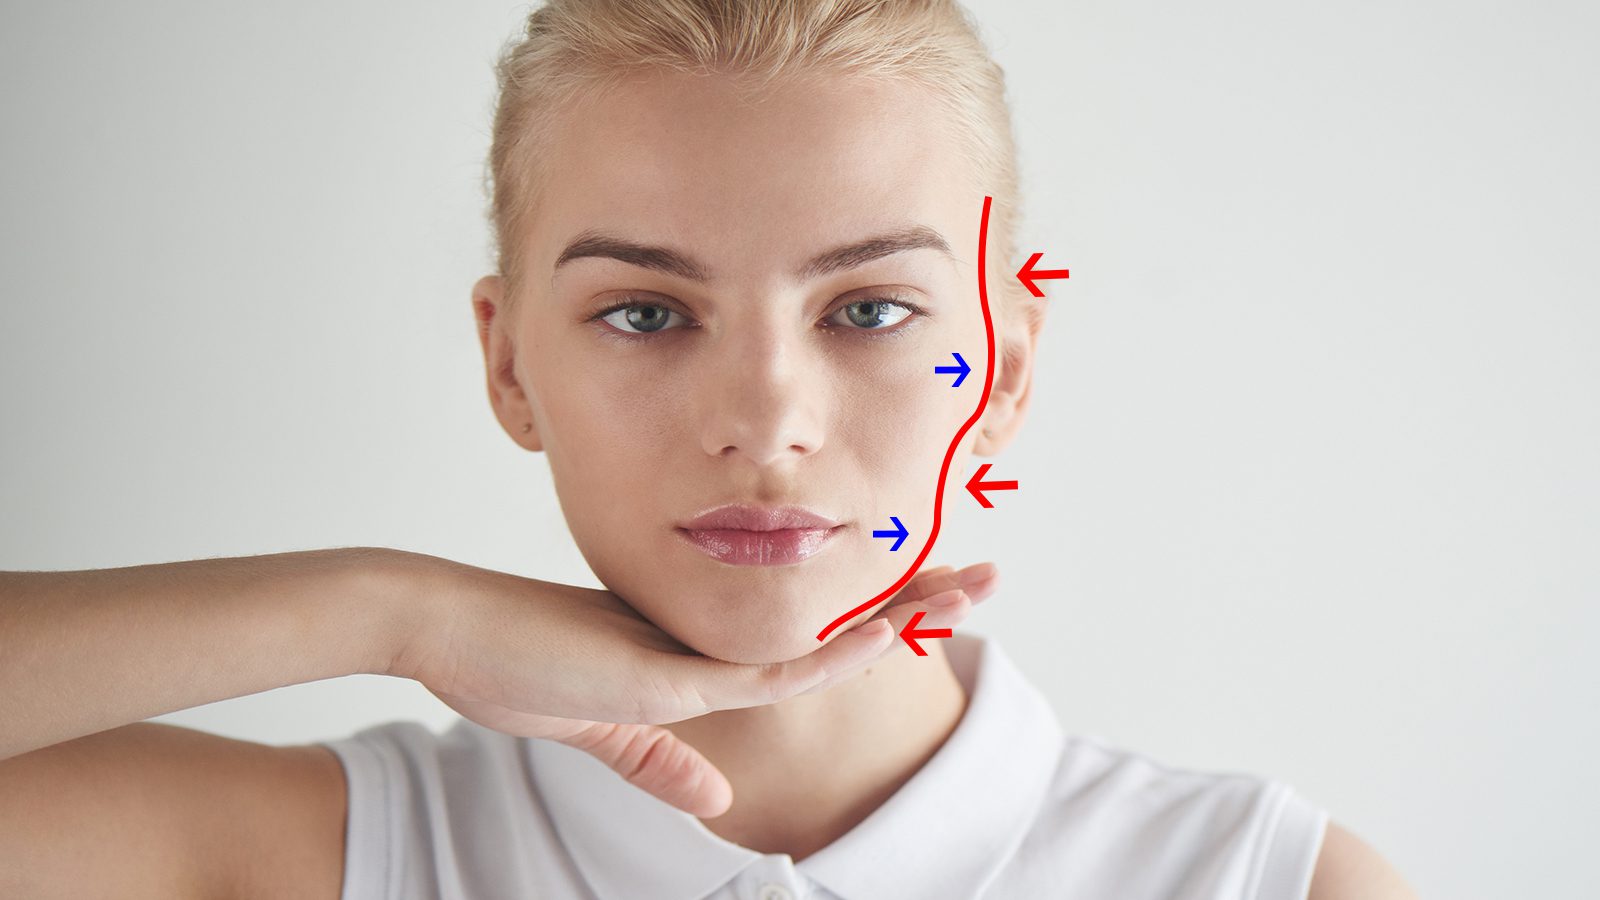 This Jawline Exercise That Gives You a More Sculpted Face